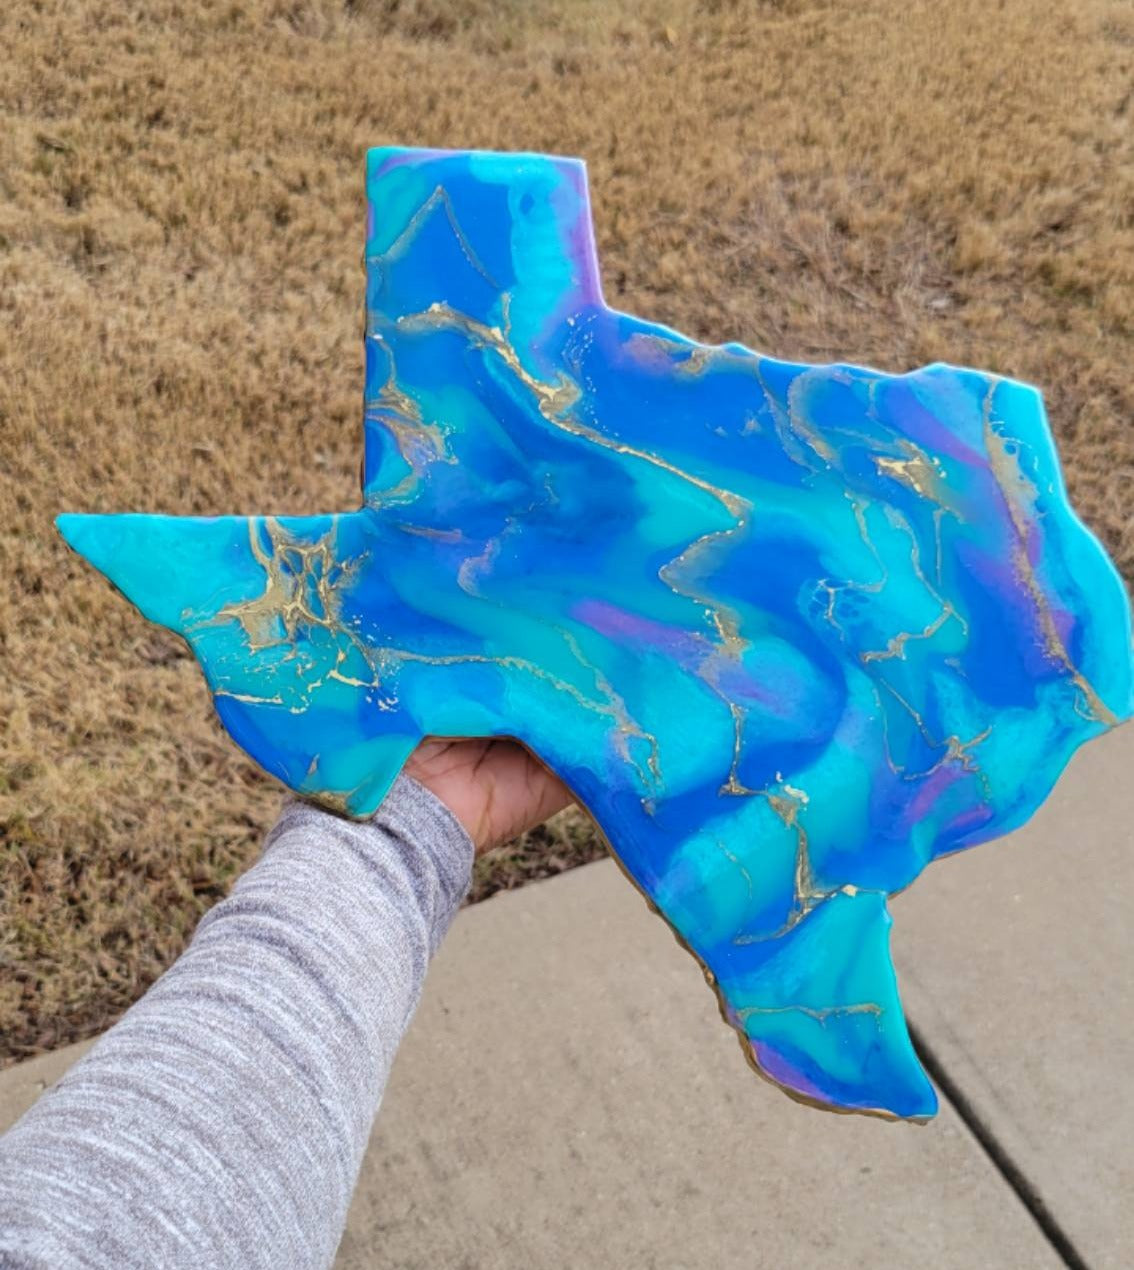 Teal, Blue, Purple, and Gold Texas